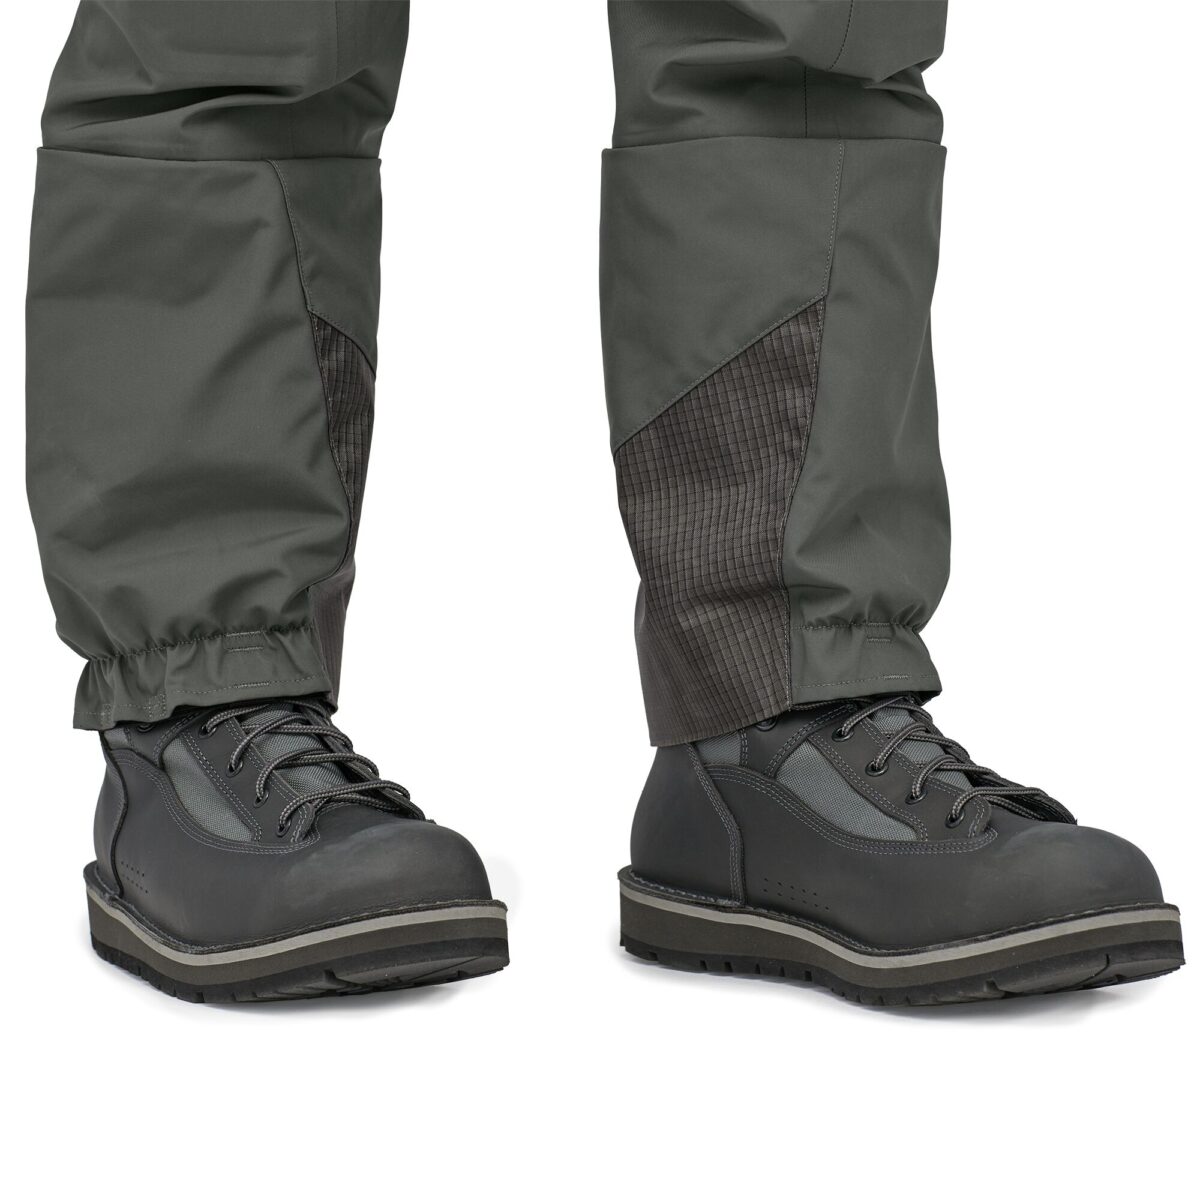 Vadeador Patagonia Swiftcurrent Expedition Wader 2020